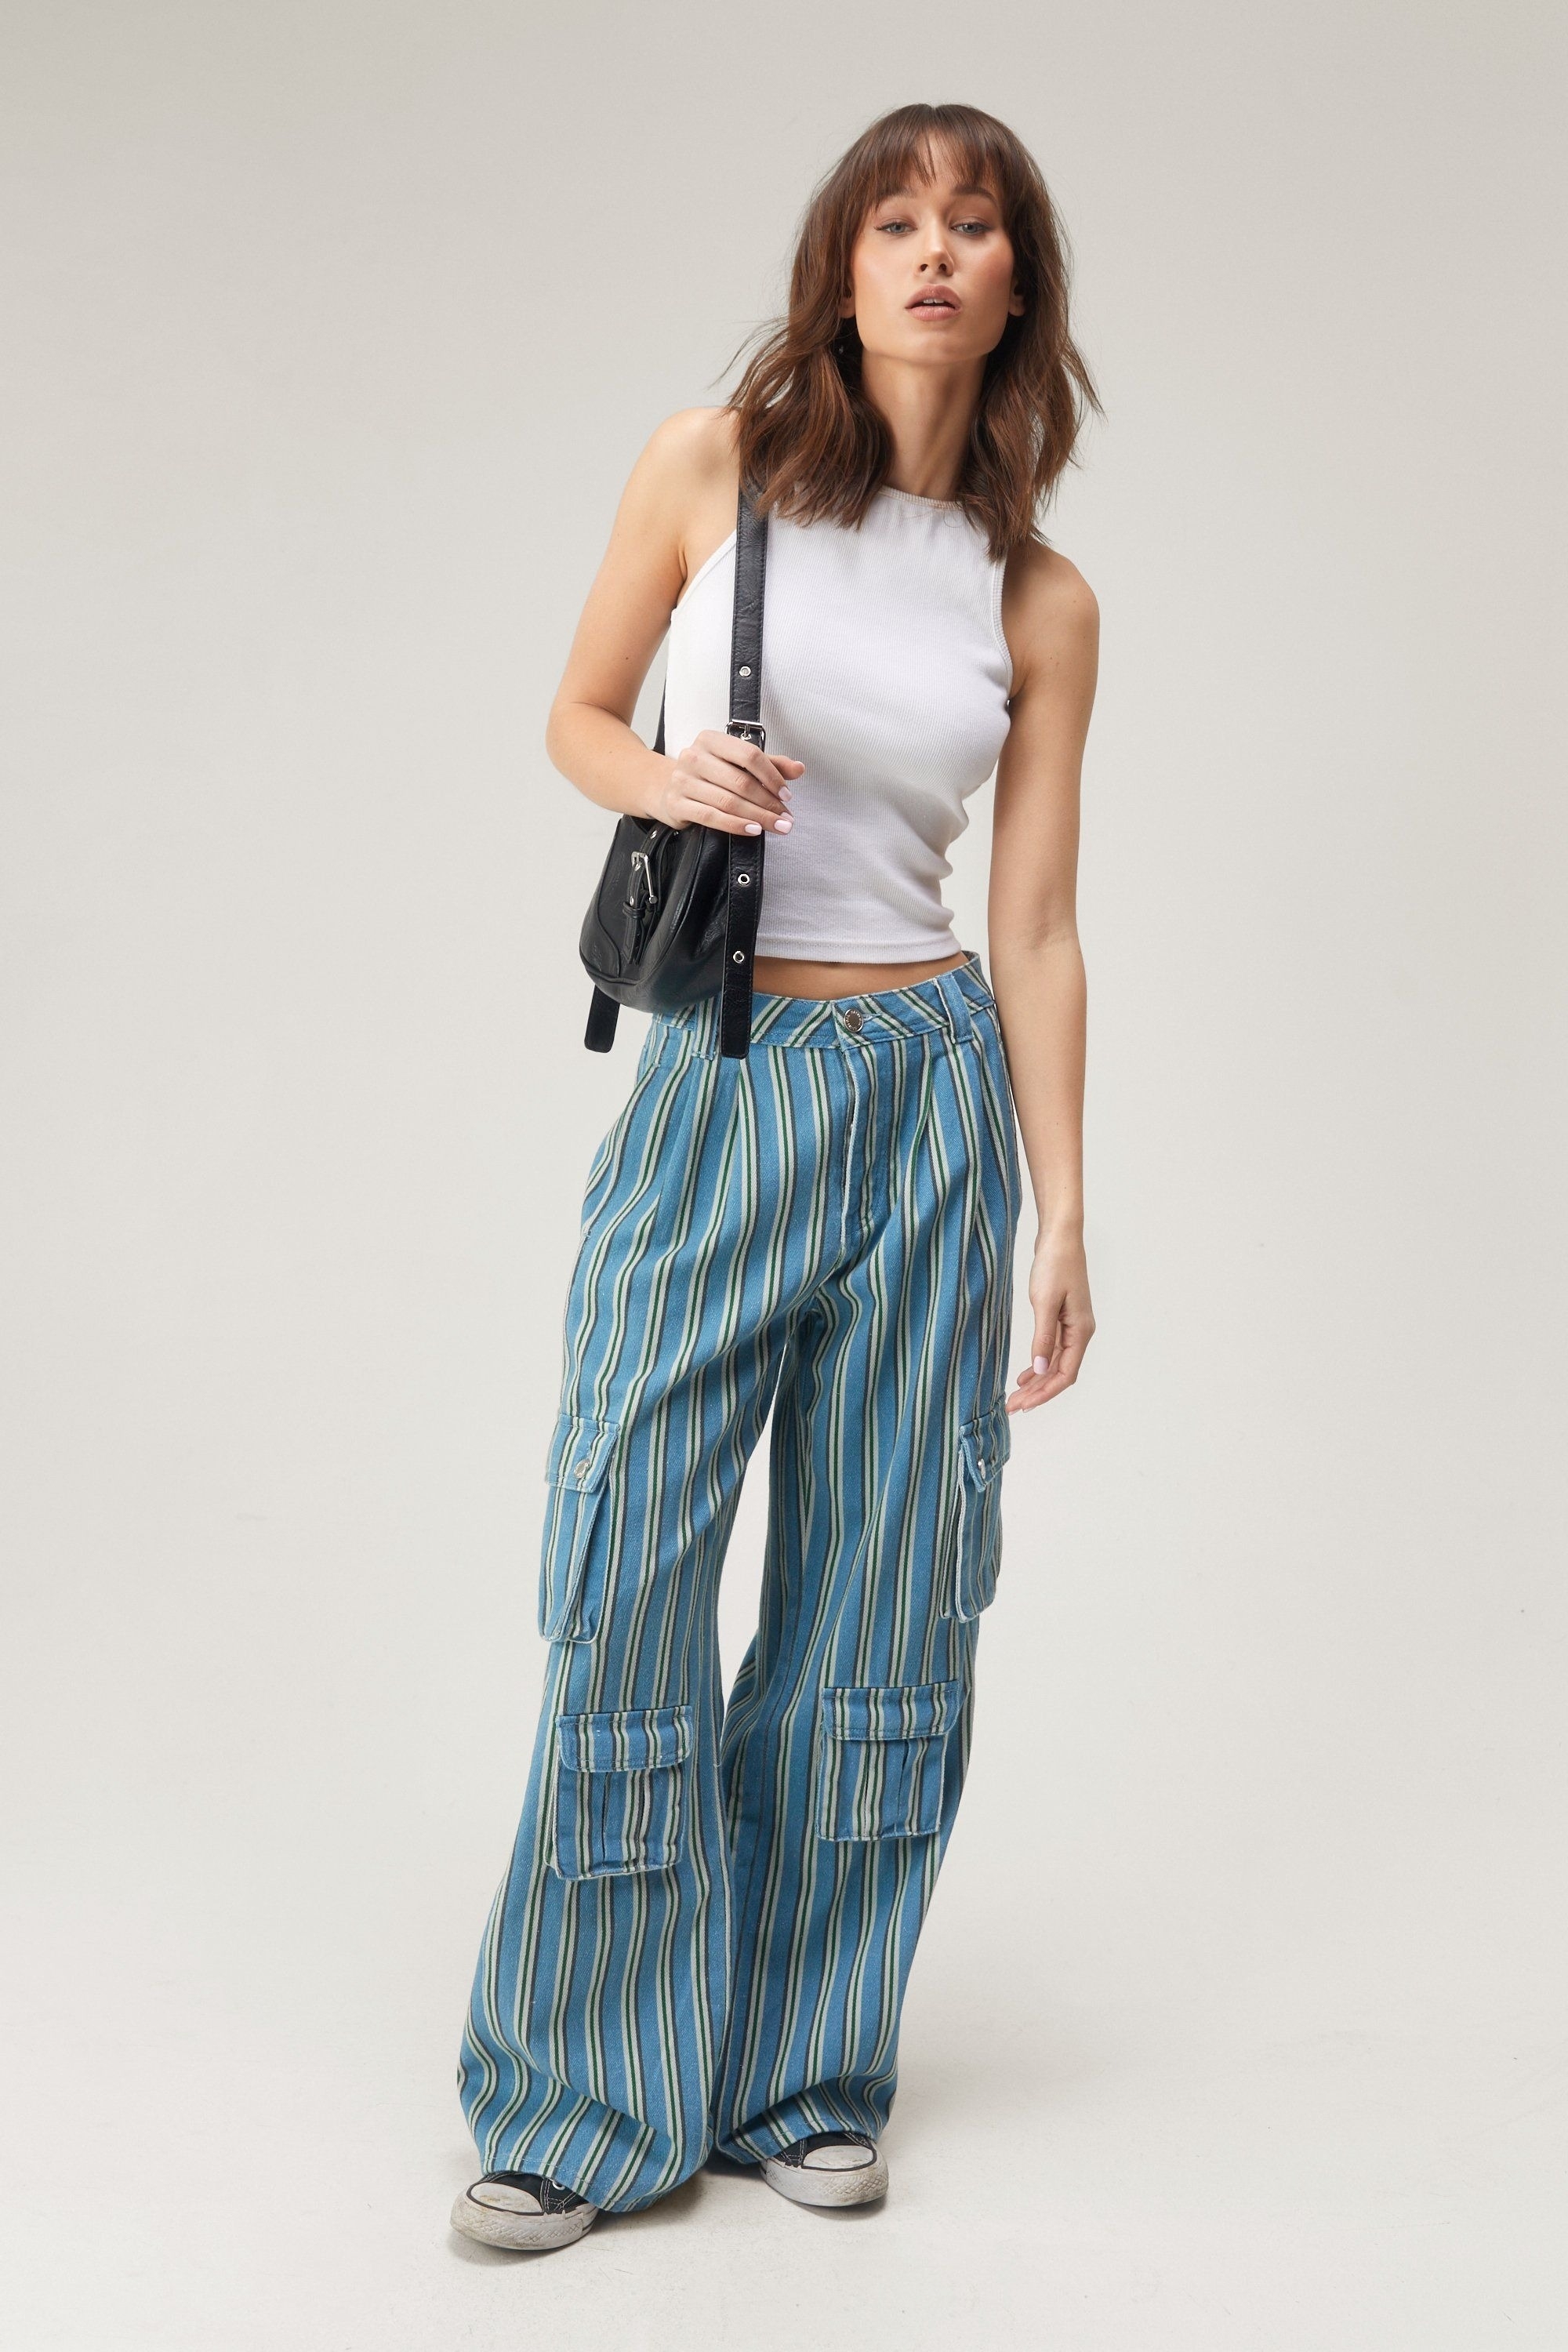 Woman in a white sleeveless top and striped trousers with a shoulder bag, posing for a fashion look